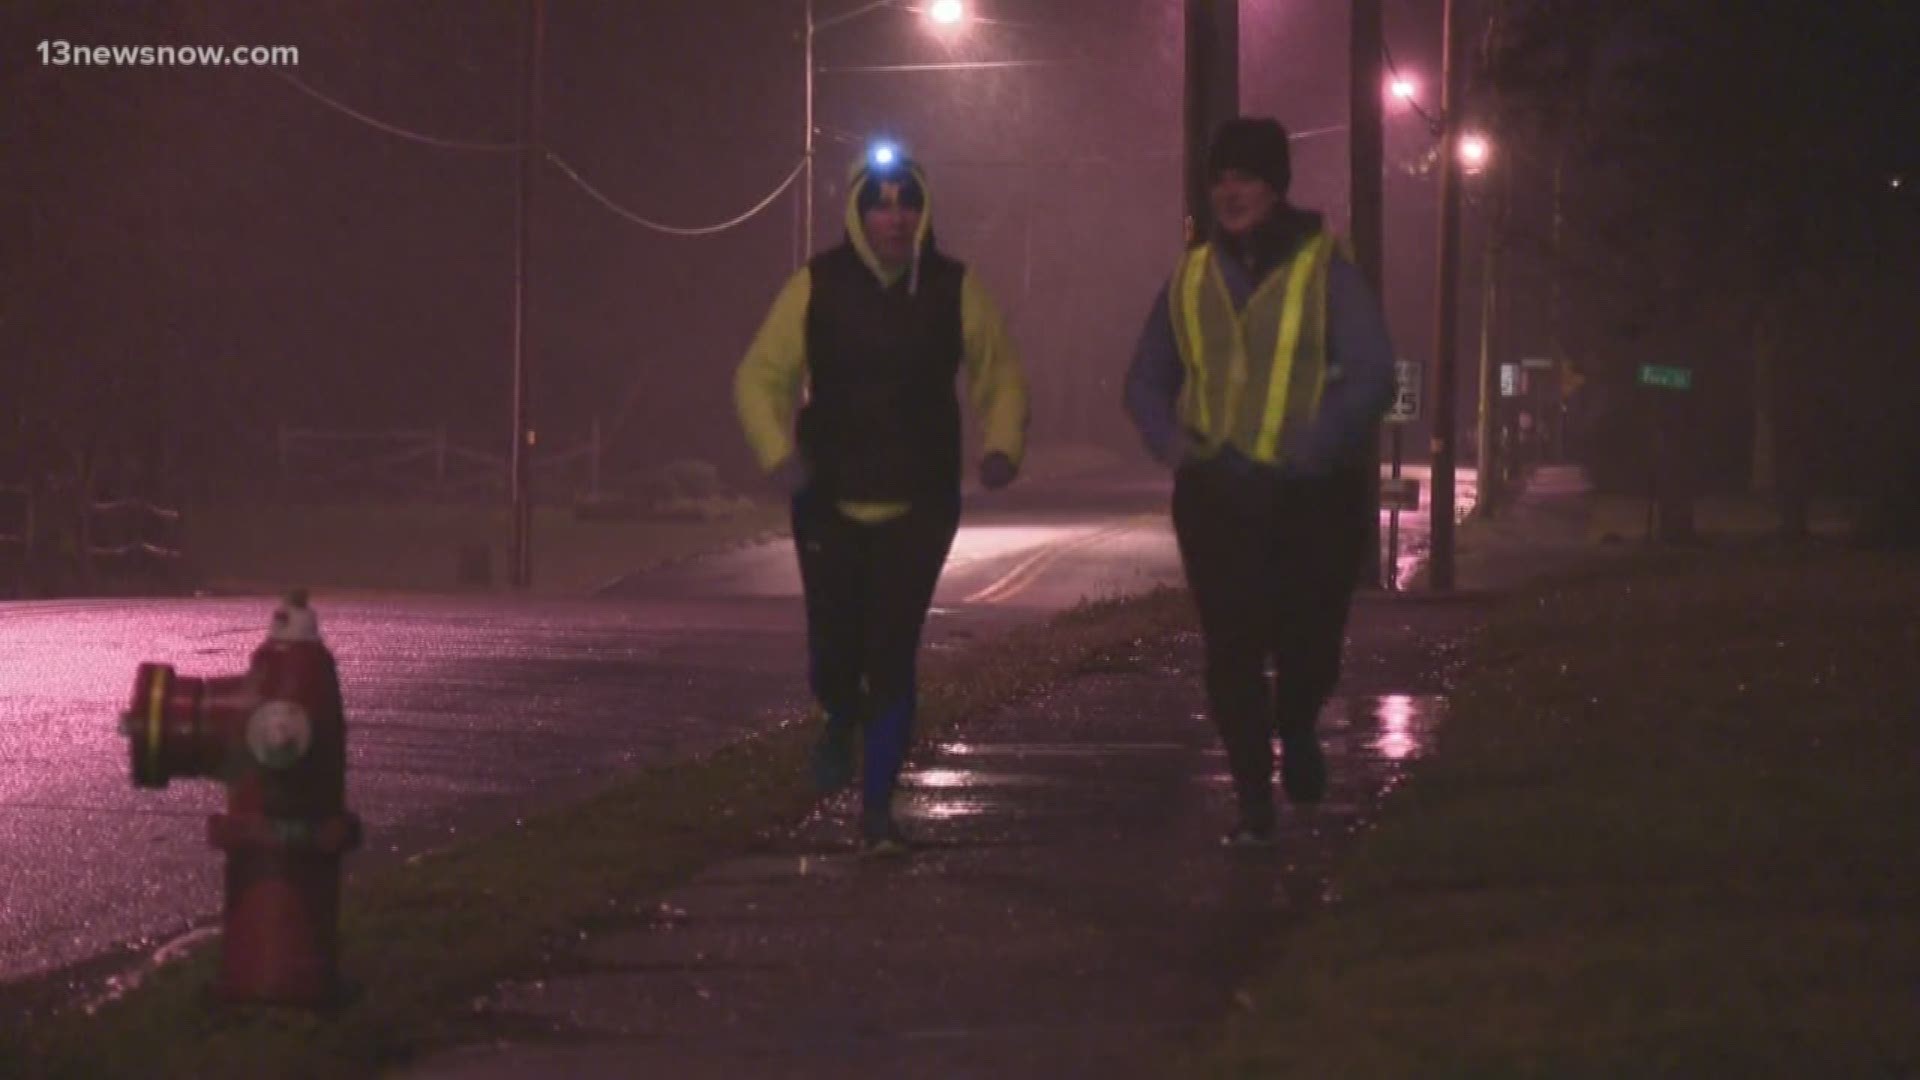 It's wet and cold, but that's not stopping people from getting in a good run!